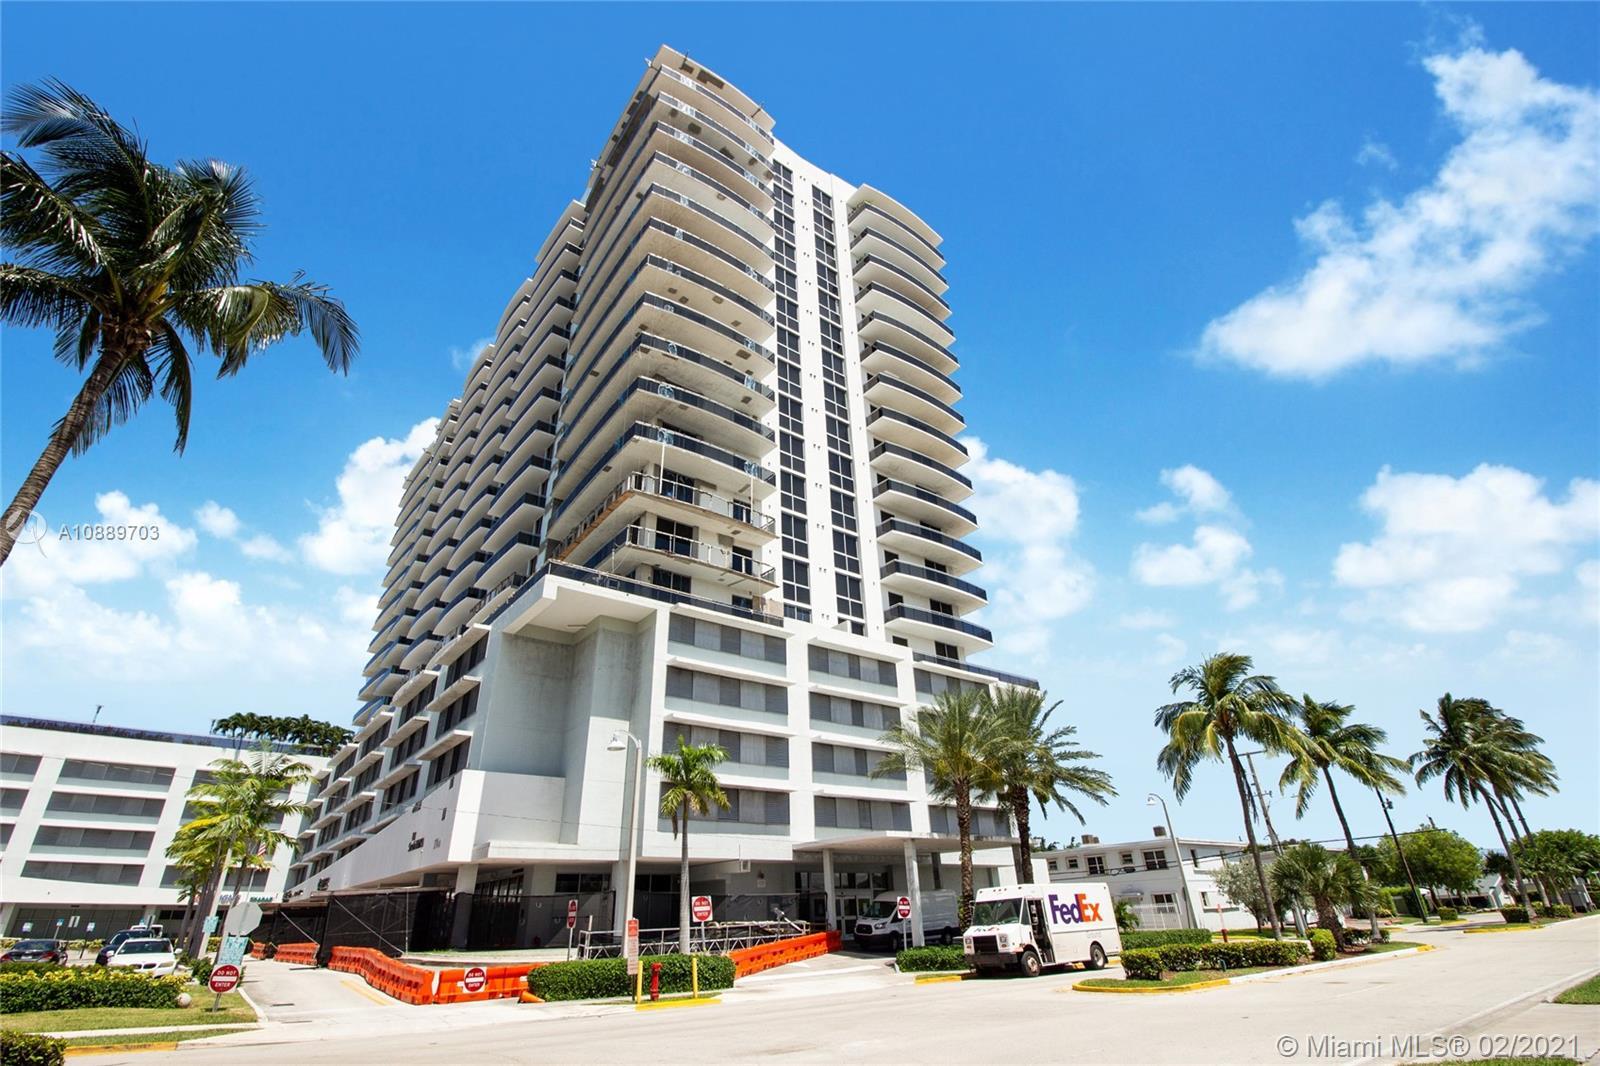 Gorgeous condo for sale on one of Miami's most beautiful islands. The Lexi’s best & most desired uni